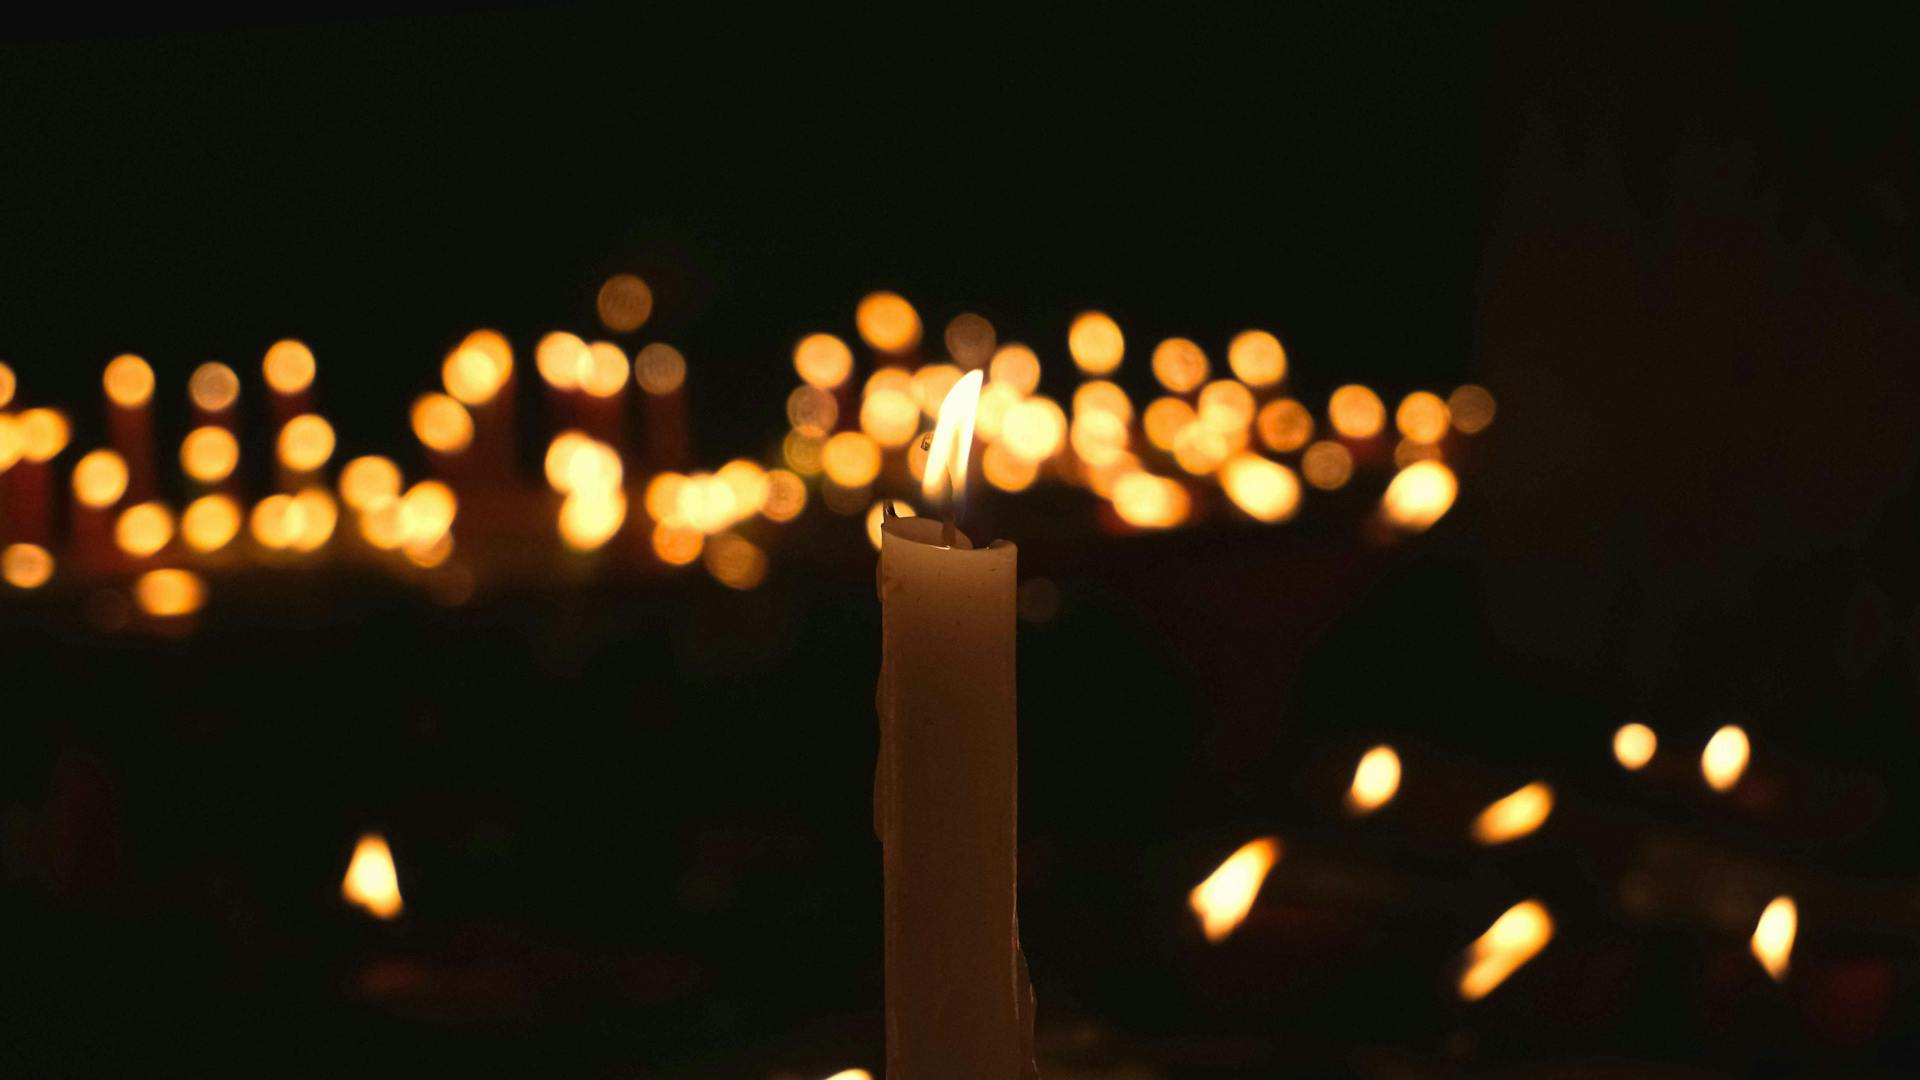 Set against a dark background, a candle flickers in the foreground, surrounded by other candles.